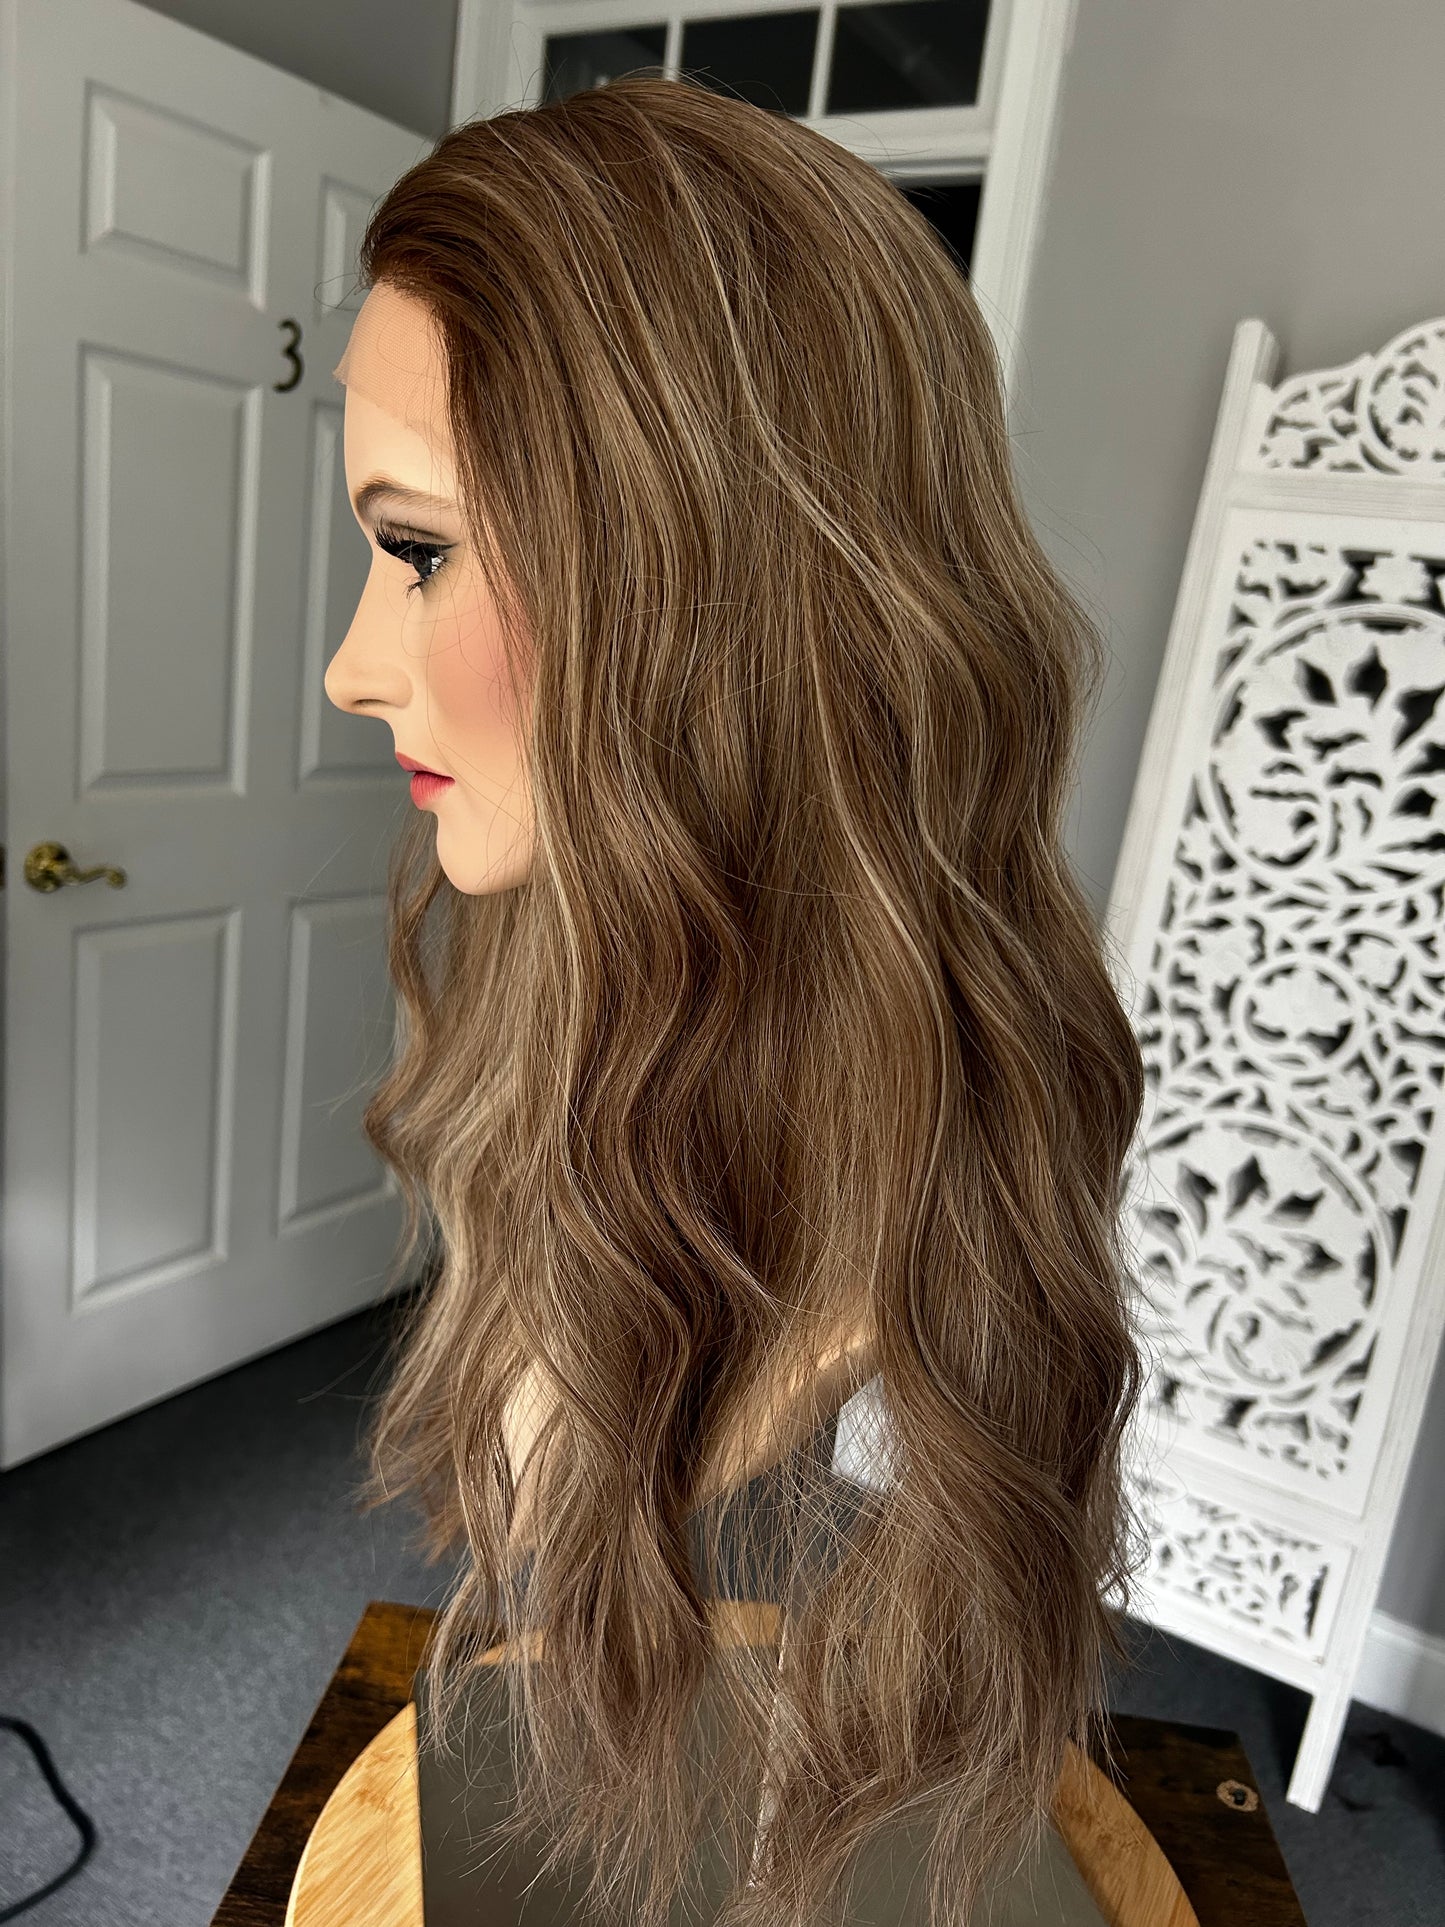 Ashy Level 6 Dark Blonde with Cool Level 7/8 Blonde Highlights Human Hair Wig